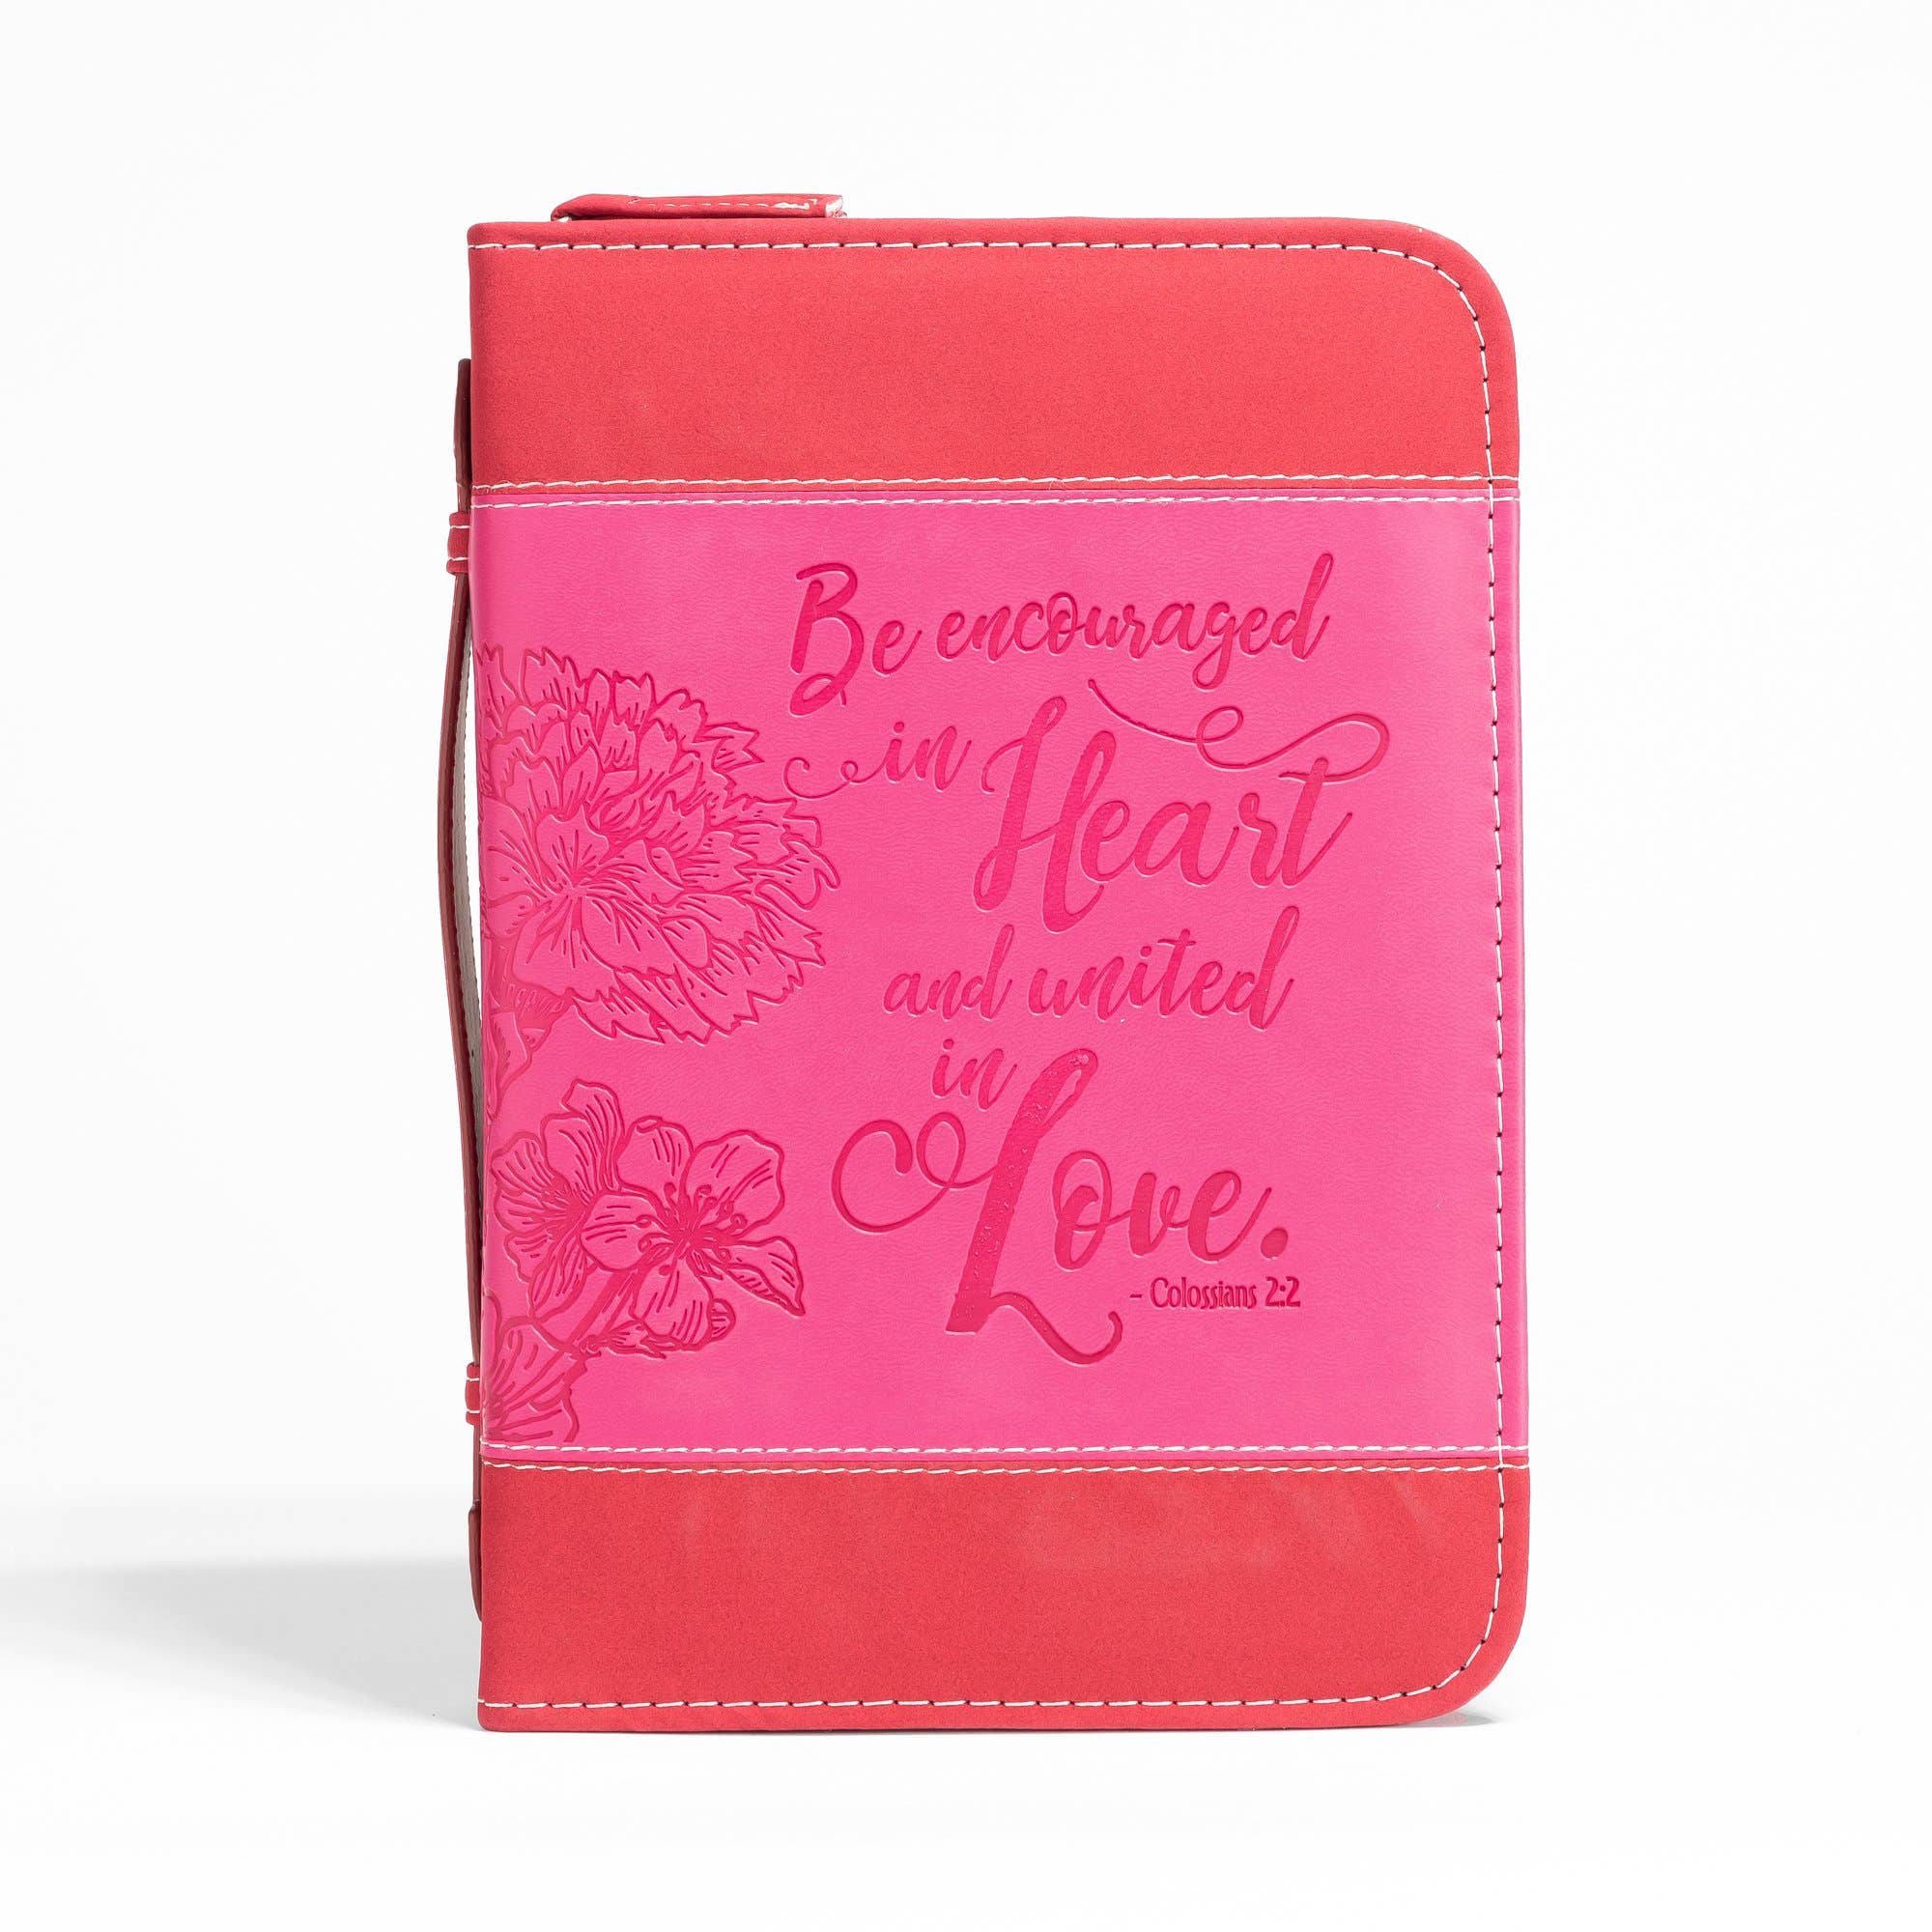 Bible Cover -Pink floral, Colossians 2:2: Large